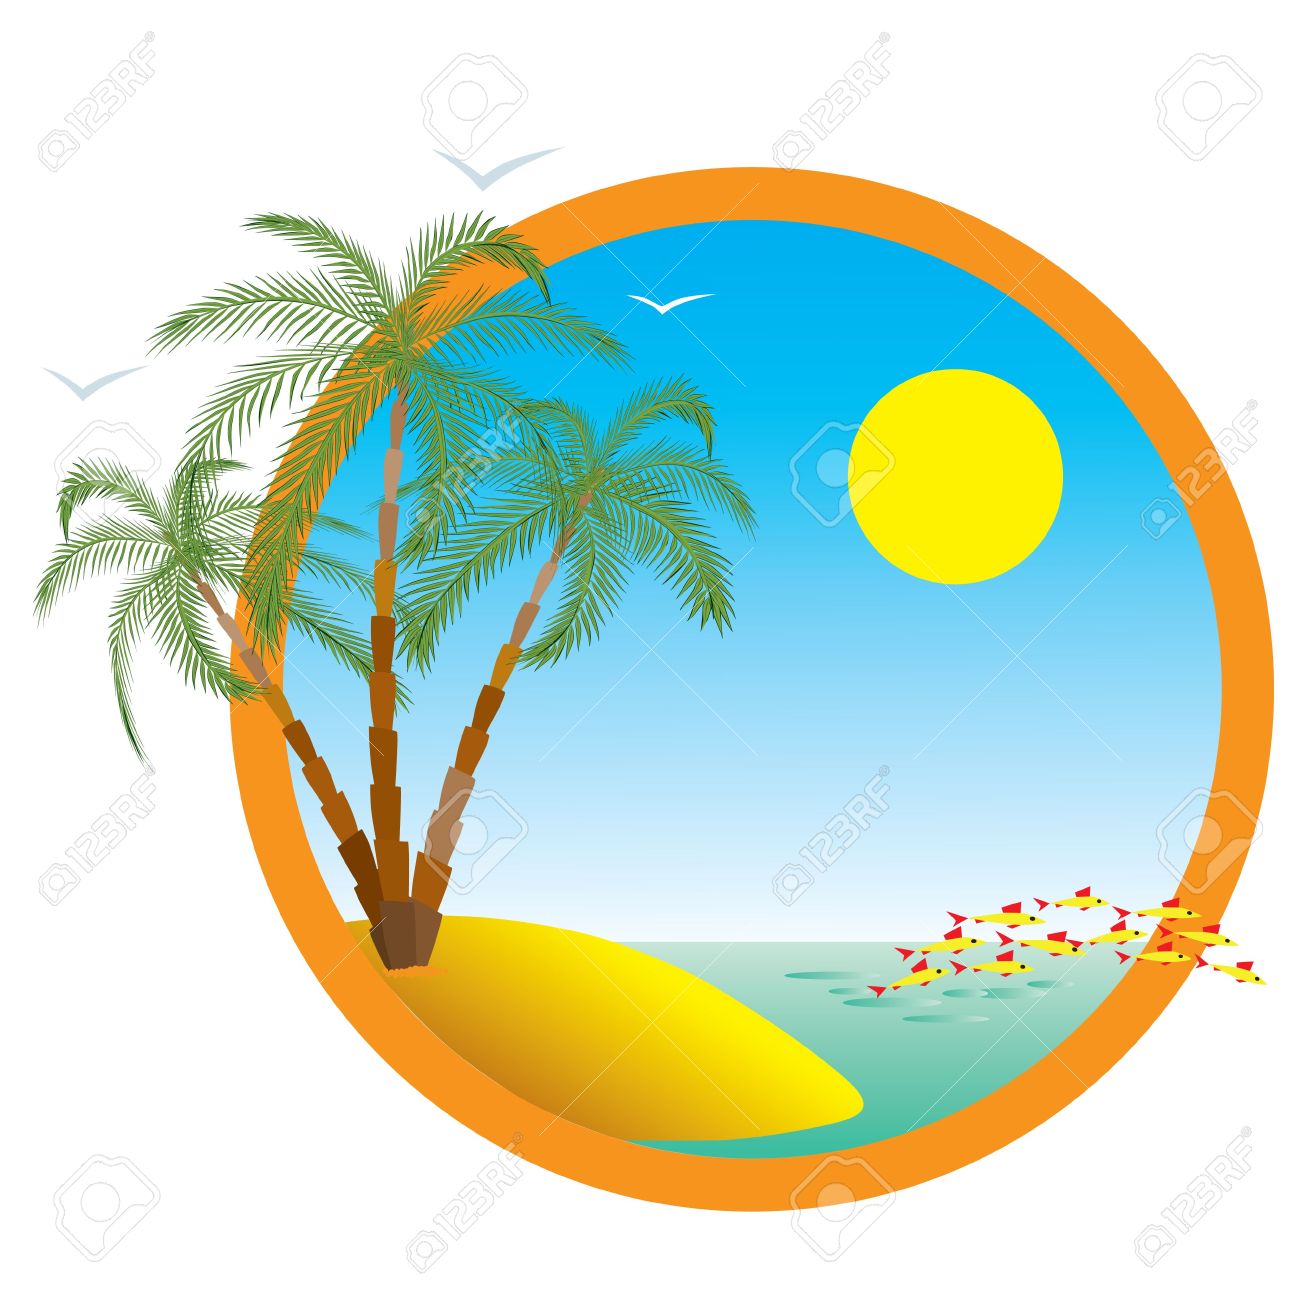 Island clipart holiday island. Free cliparts download images